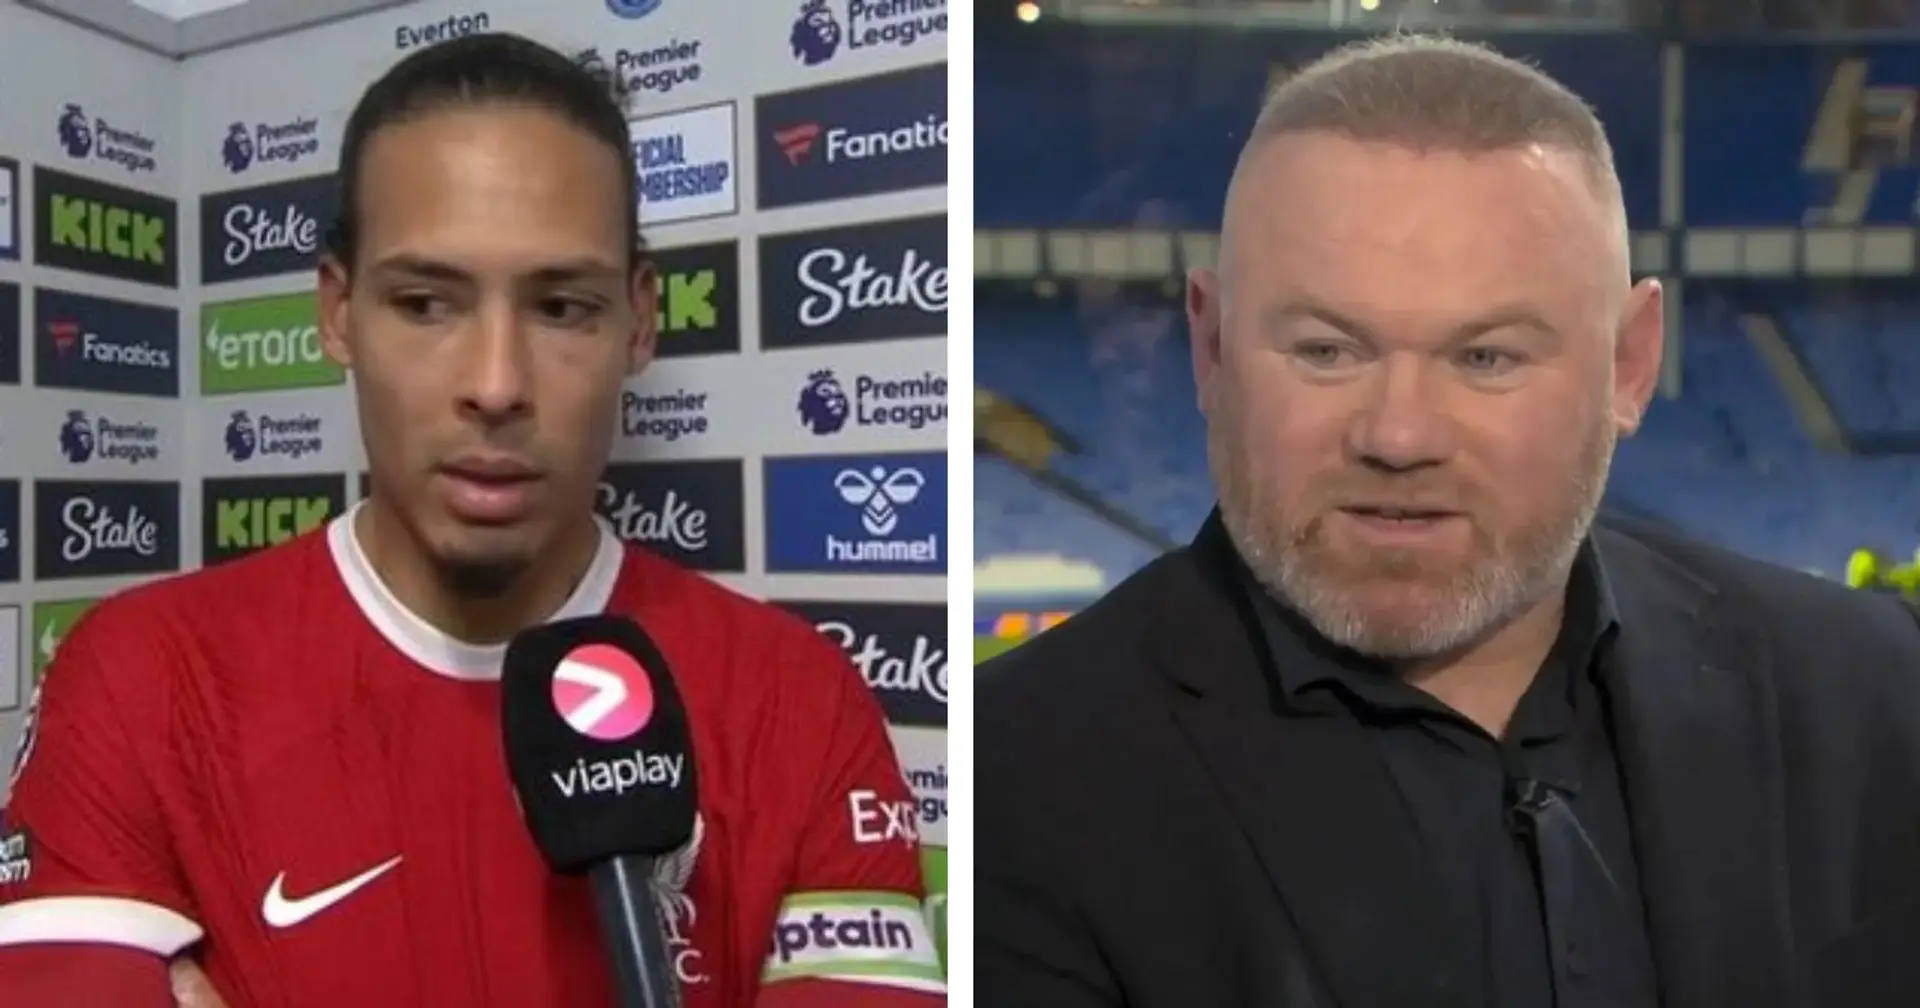 'Get on with it!': Rooney slams Van Dijk over 'worrying' comments after Everton defeat